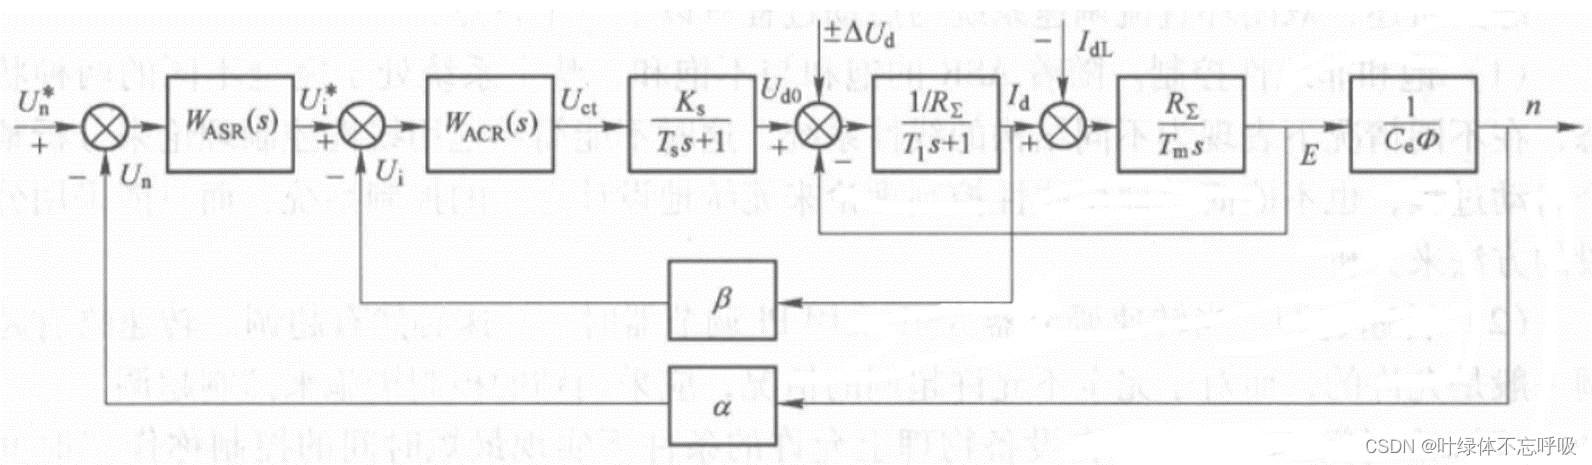 Matlab / Simulink simulation of double closed loop DC speed regulation system